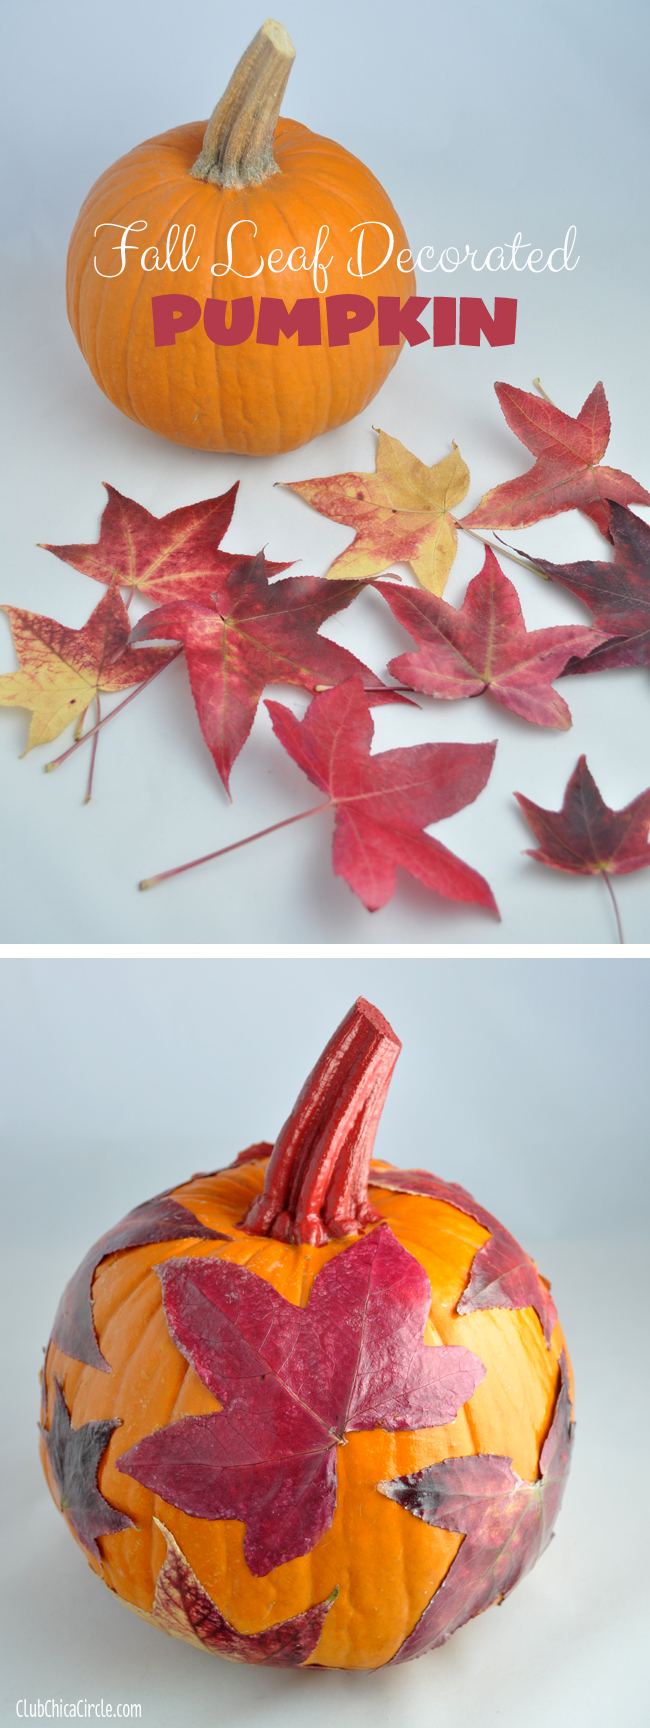 Fall-Leaf-Decorated-Pumpkin-craft-idea-with-decoupage-and-multi-surface-paint